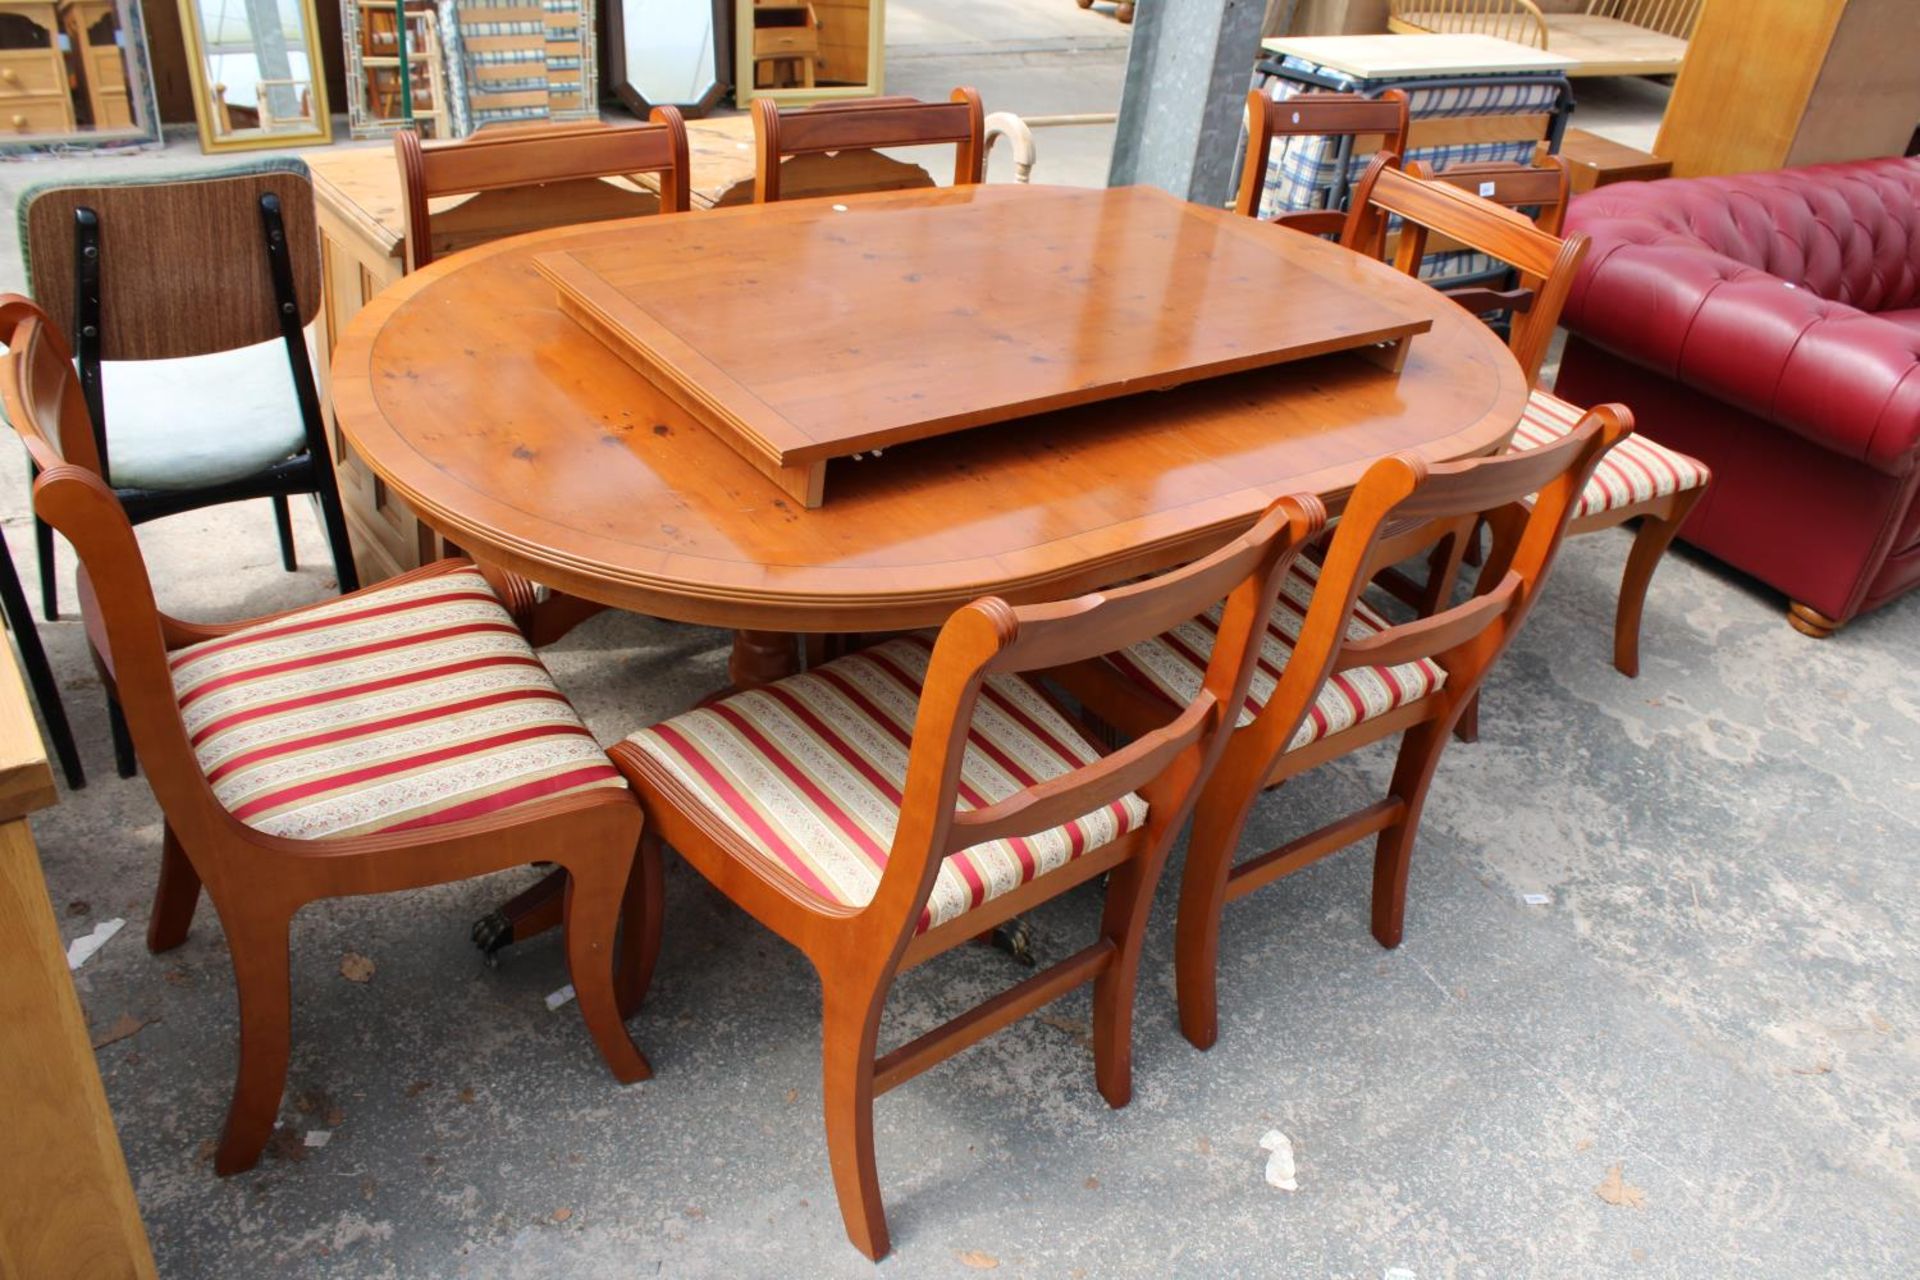 A YEW WOOD REGENCY STYLE EXTENDING PEDESTAL DINING TABLE (62" x 39") (LEAF 22") WITH EIGHT CHAIRS - Image 2 of 5